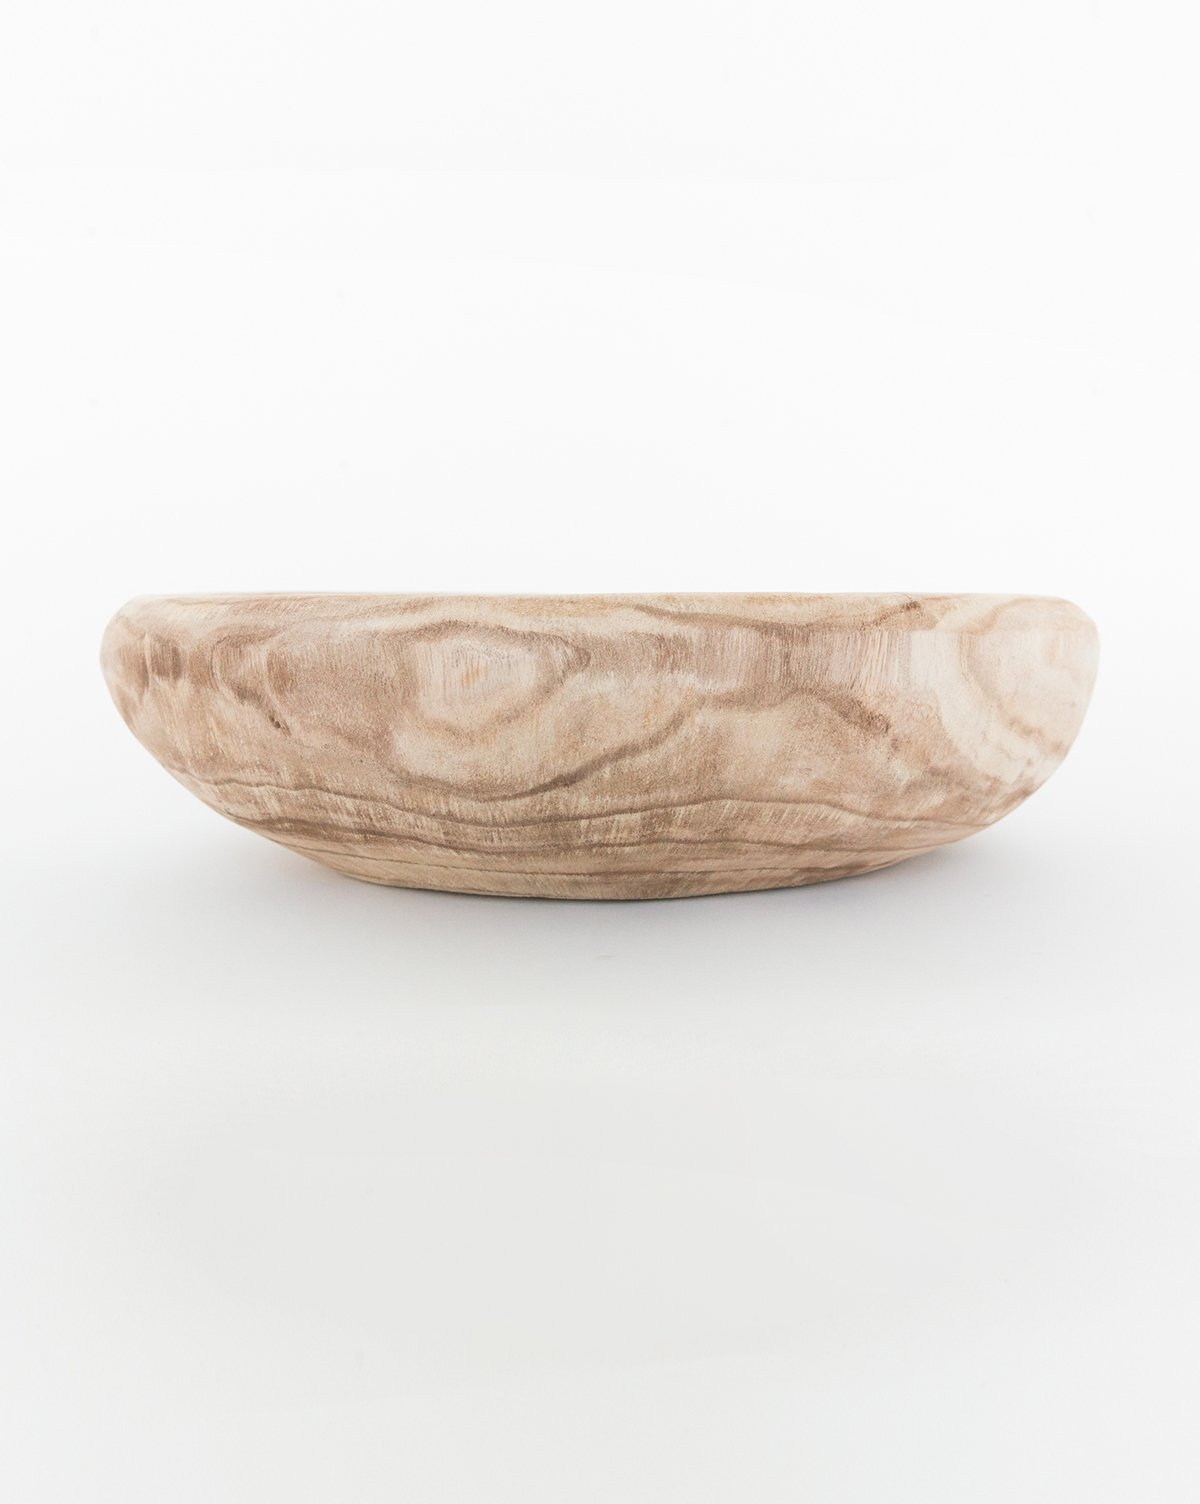 SIMPLY SMOOTH WOODEN BOWL - Image 1